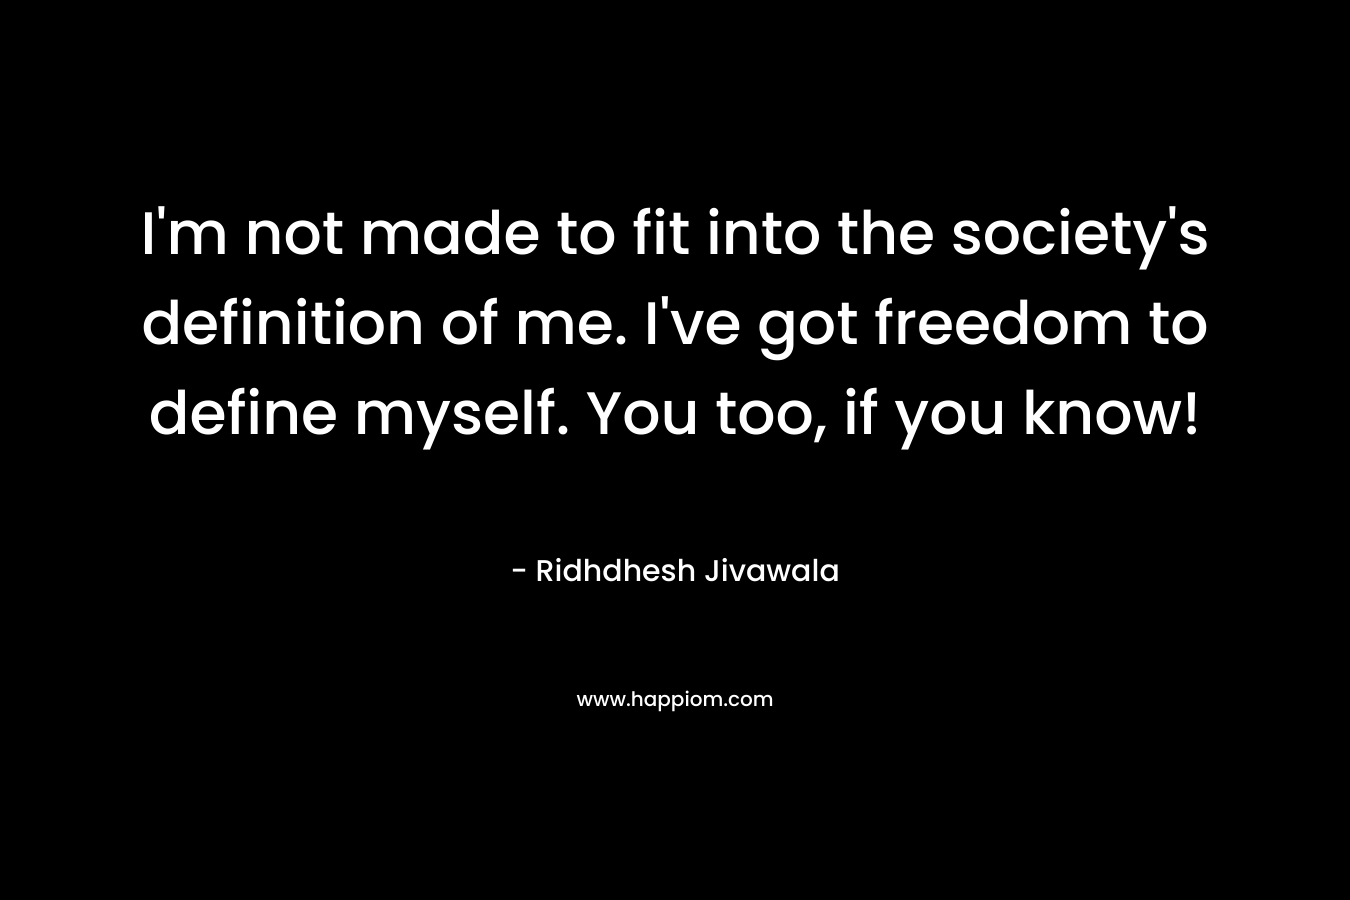 I'm not made to fit into the society's definition of me. I've got freedom to define myself. You too, if you know!